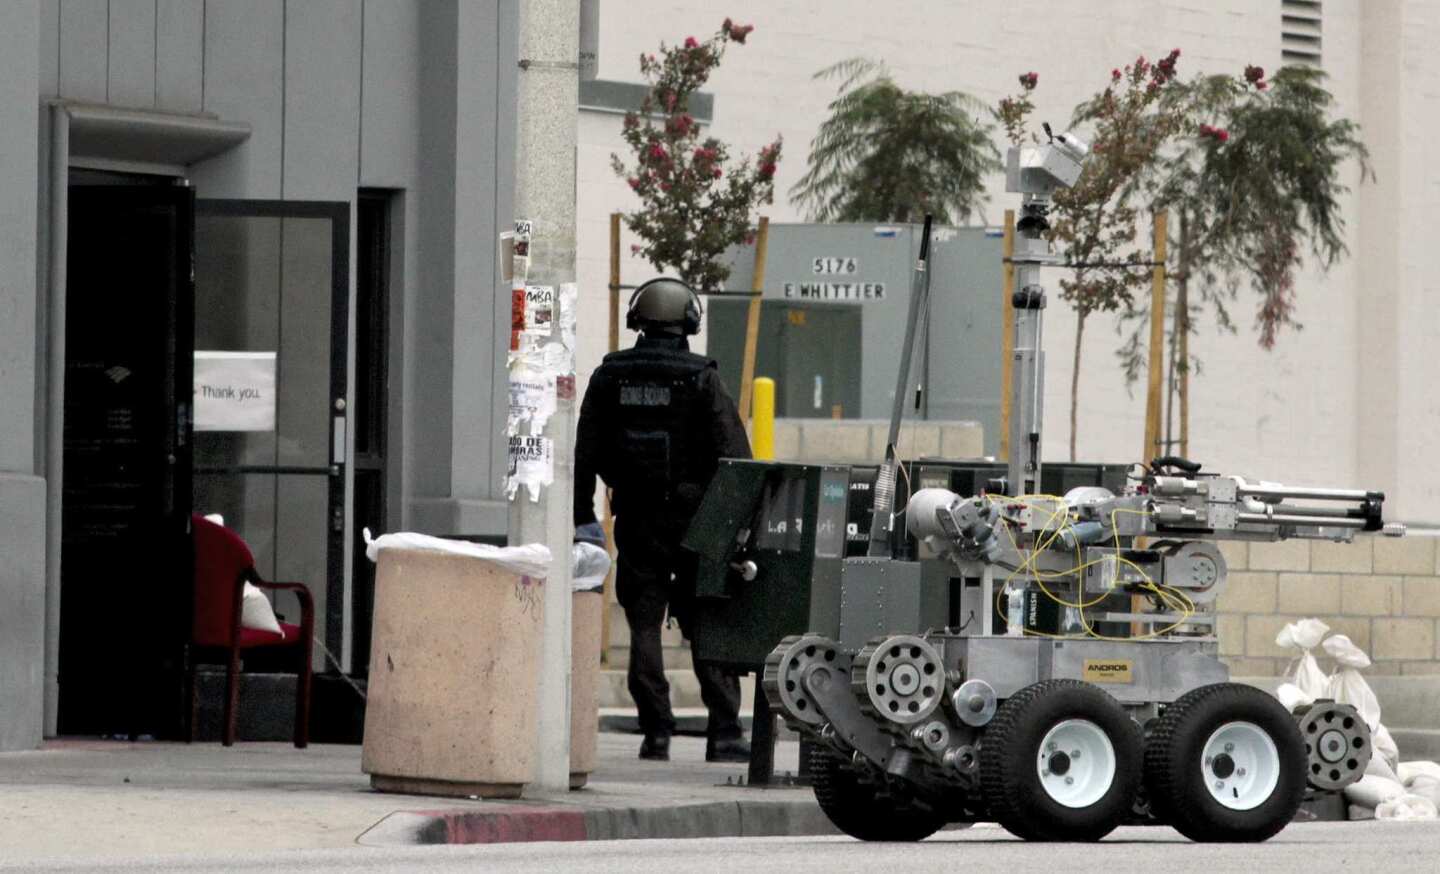 The L.A. County Sheriff's Department bomb squad was called to a Bank of America branch where a robbery occurred Wednesday morning in East Los Angeles. A manager at the bank was strapped with an apparent explosive device and forced to help two men rob her own bank. She followed instructions to throw the money out the bank's door. The robbers escaped.